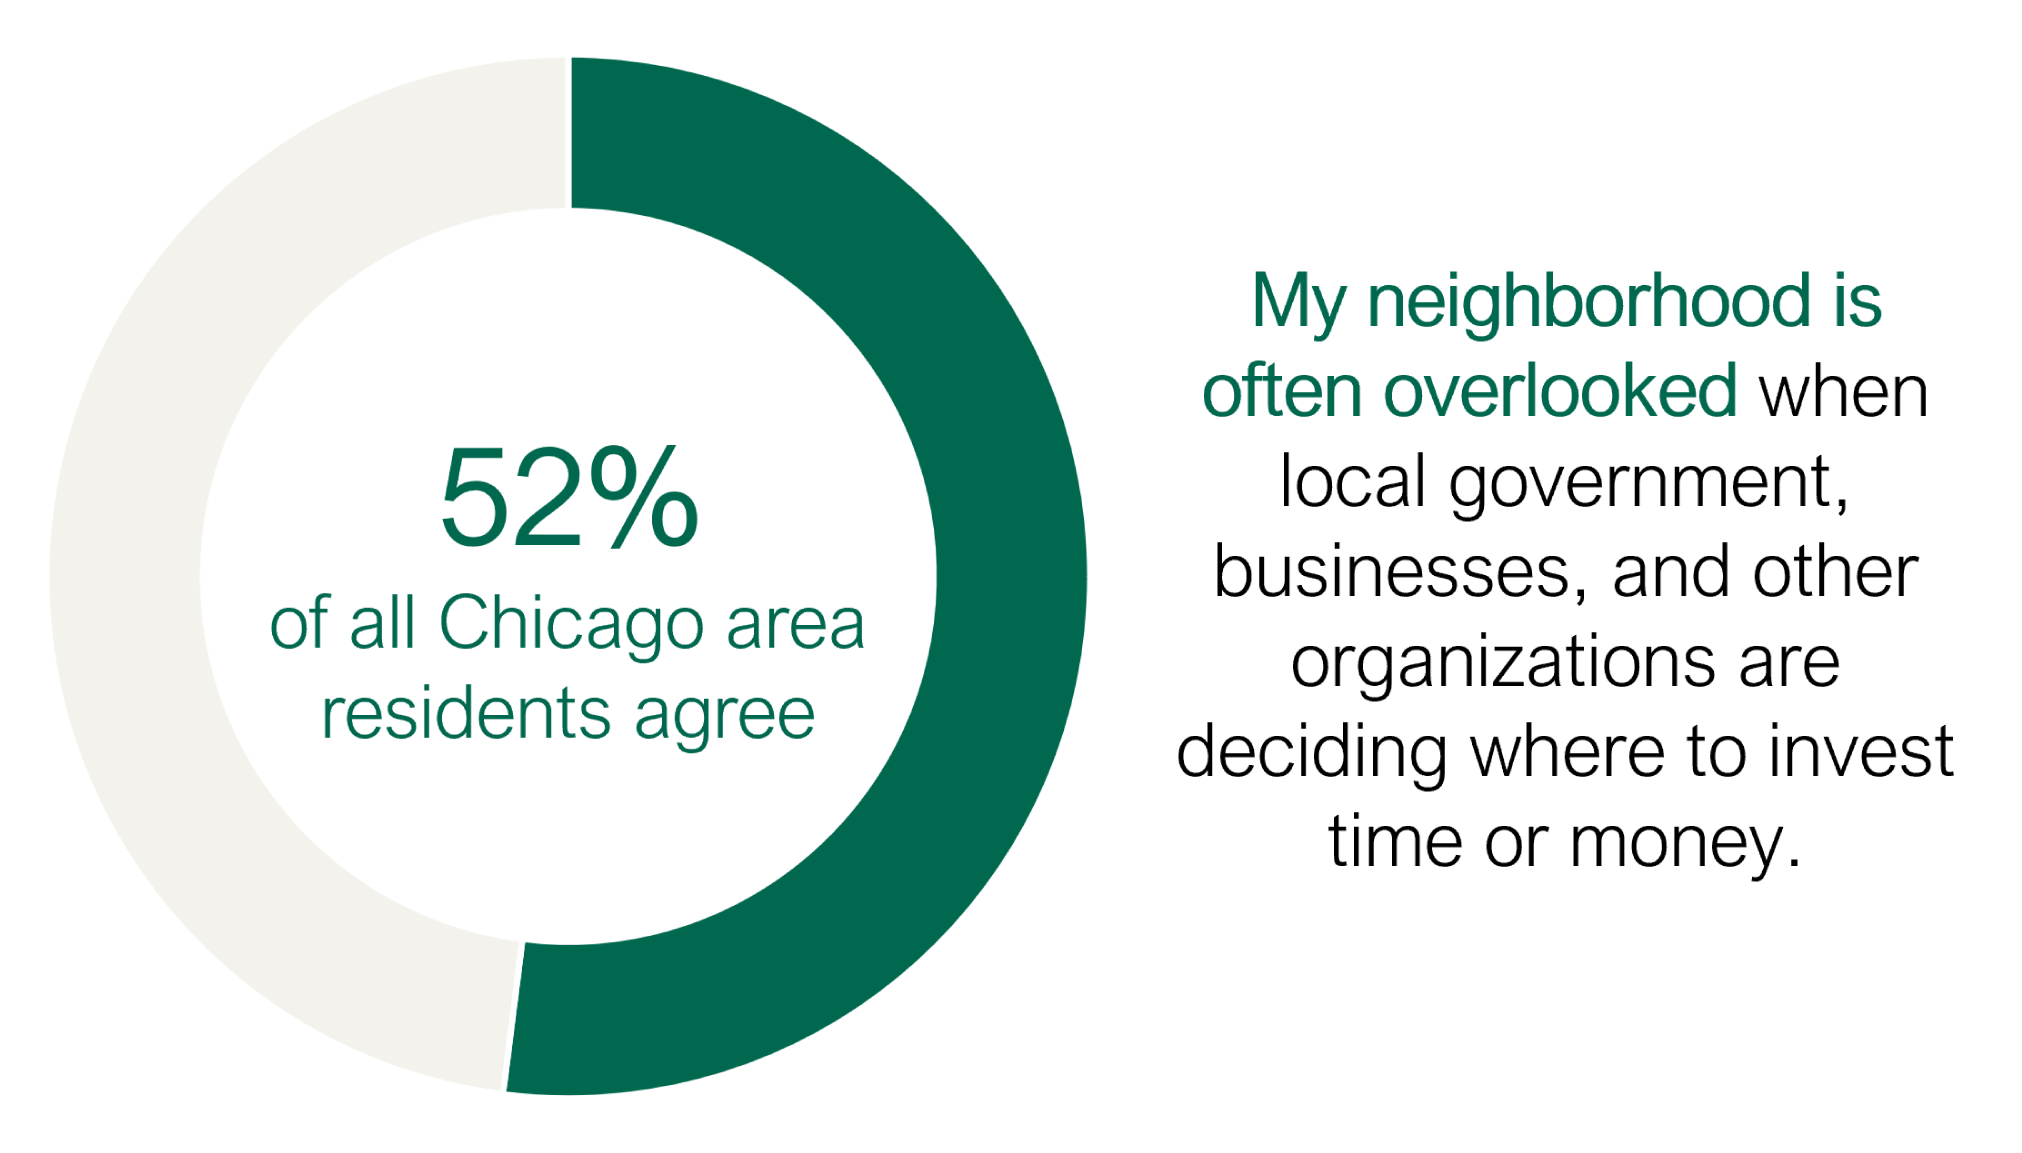 pie graph of 52 percent of residents feeling like their neighborhood is overlooked